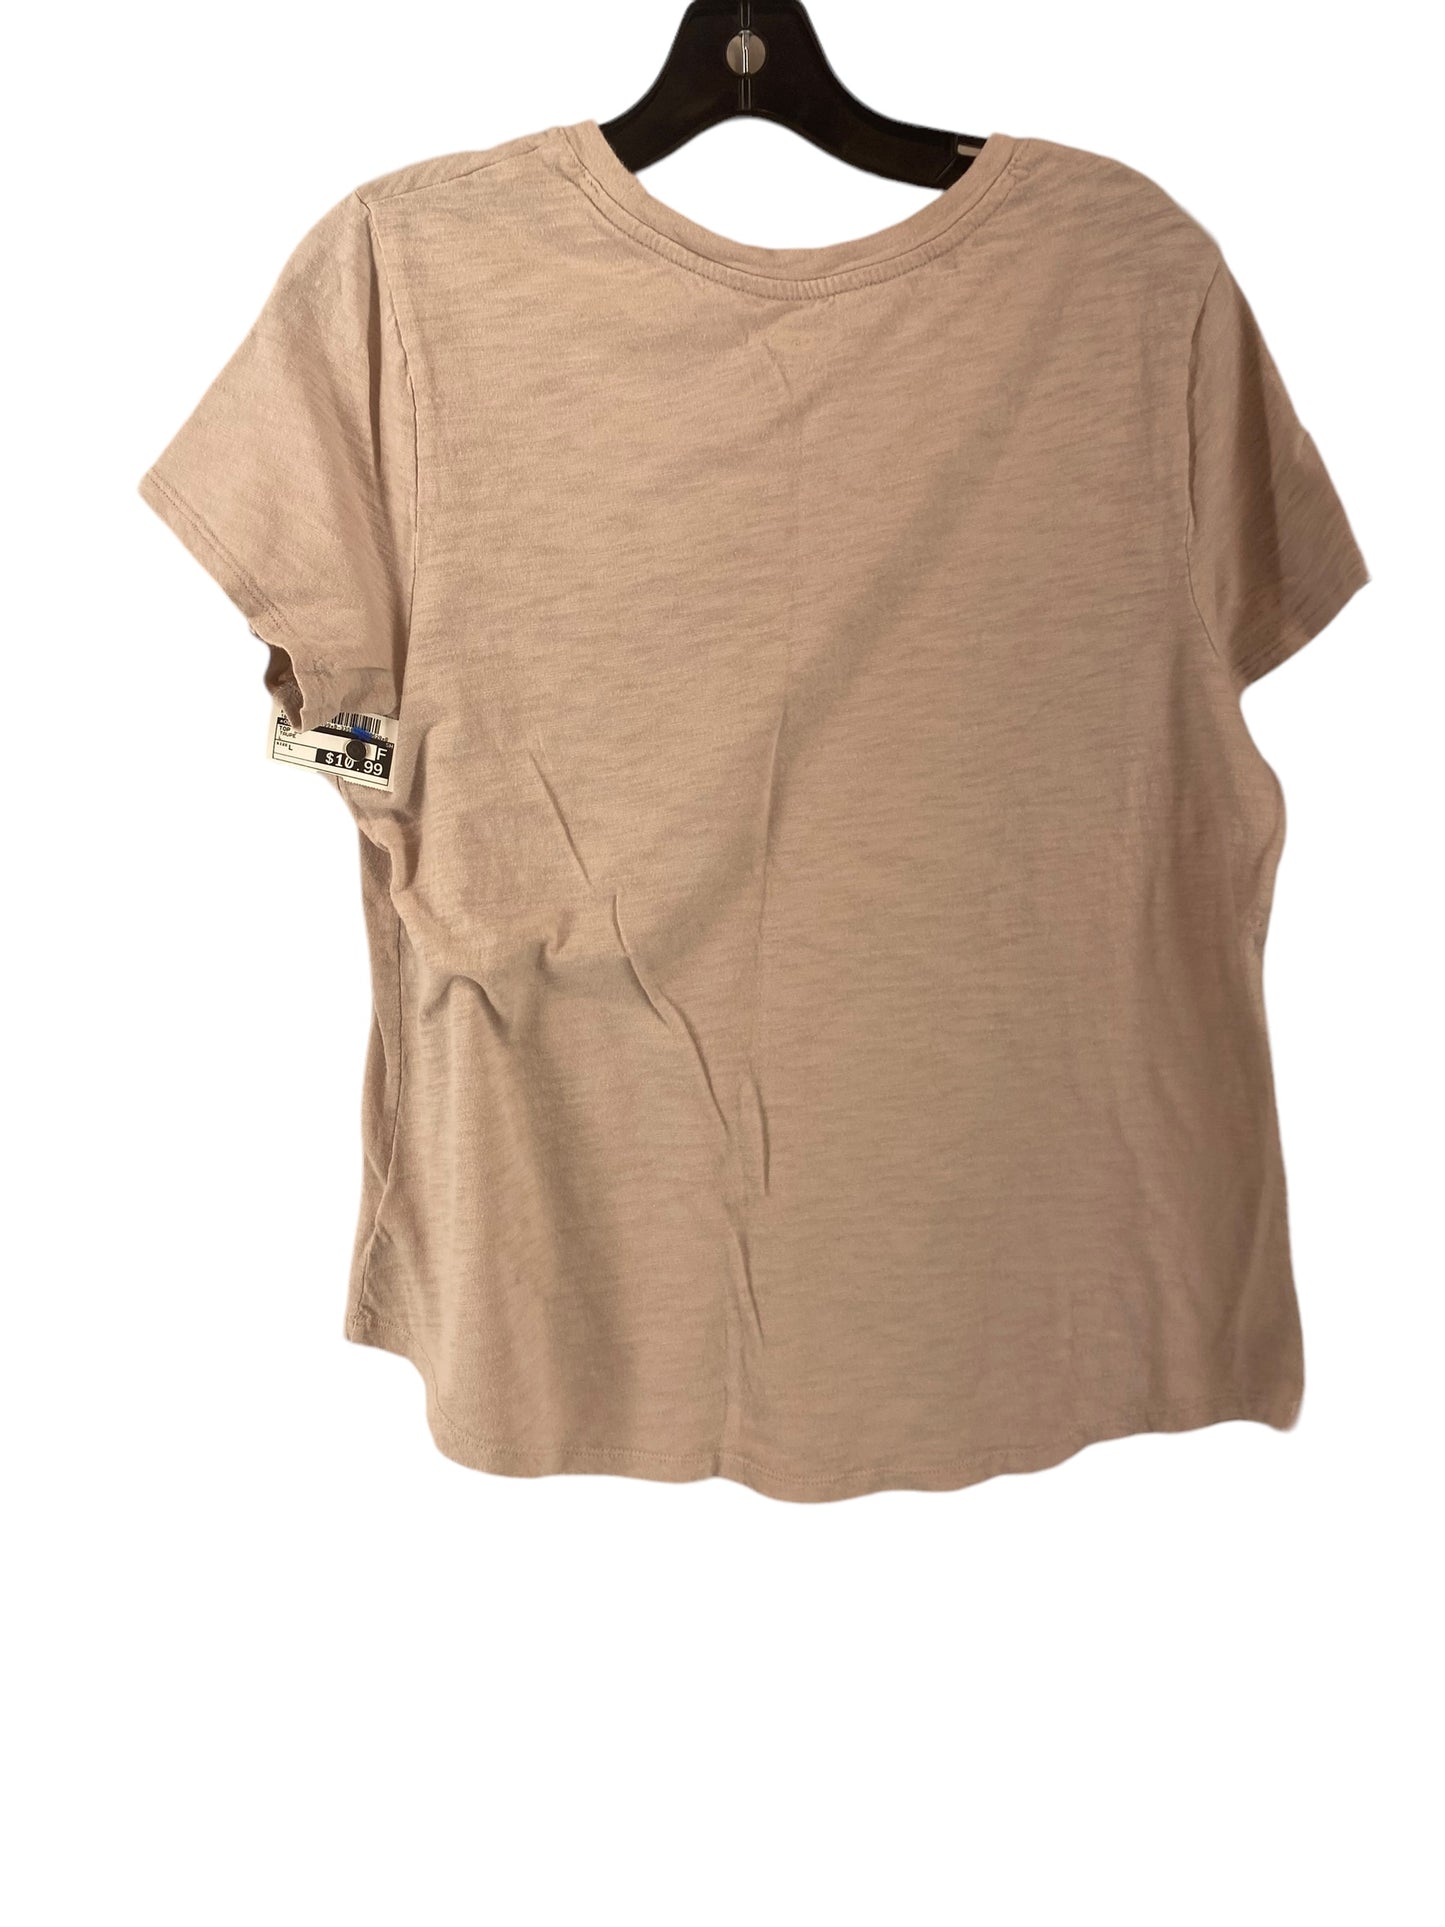 Taupe Top Short Sleeve Old Navy, Size L